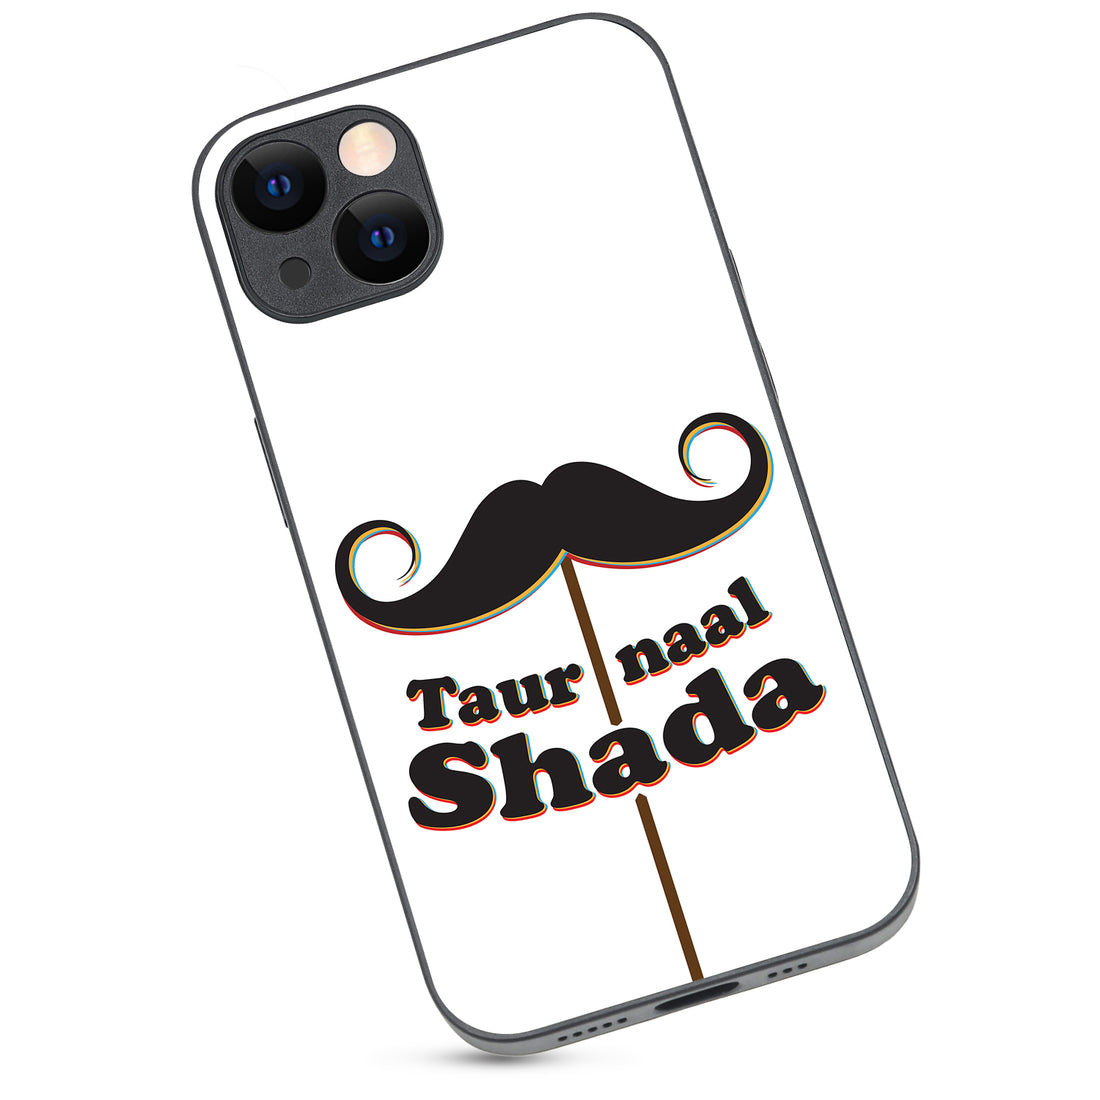 Taur Naal Shada Motivational Quotes iPhone 13 Case